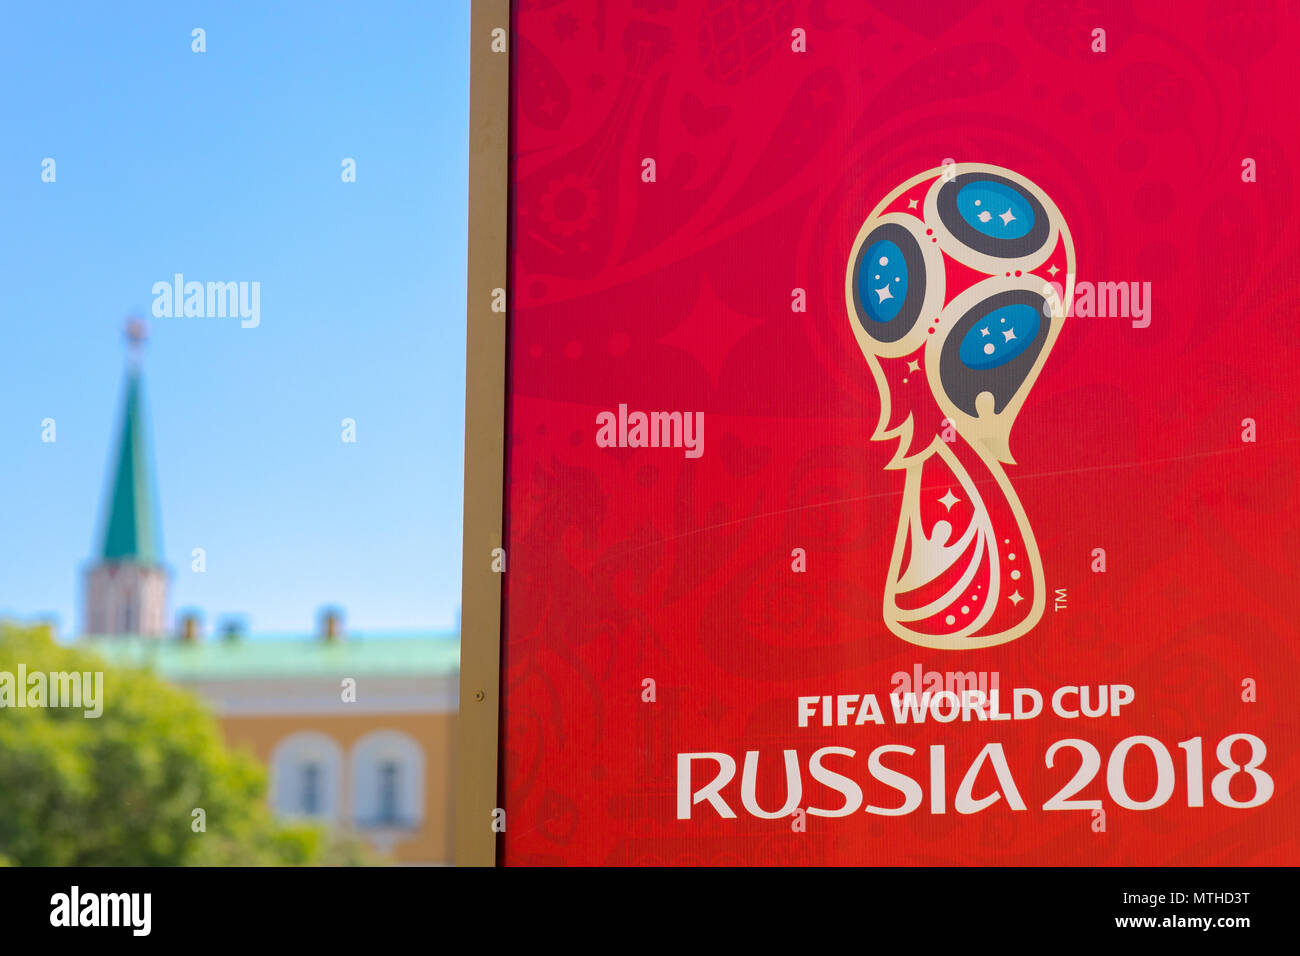 MOSCOW, RUSSIA - MAY 26, 2018: Official logo FIFA World Cup 2018 in Russia printed on a red background canvas, at Manezh Square. Kremlin and Manezh sq Stock Photo